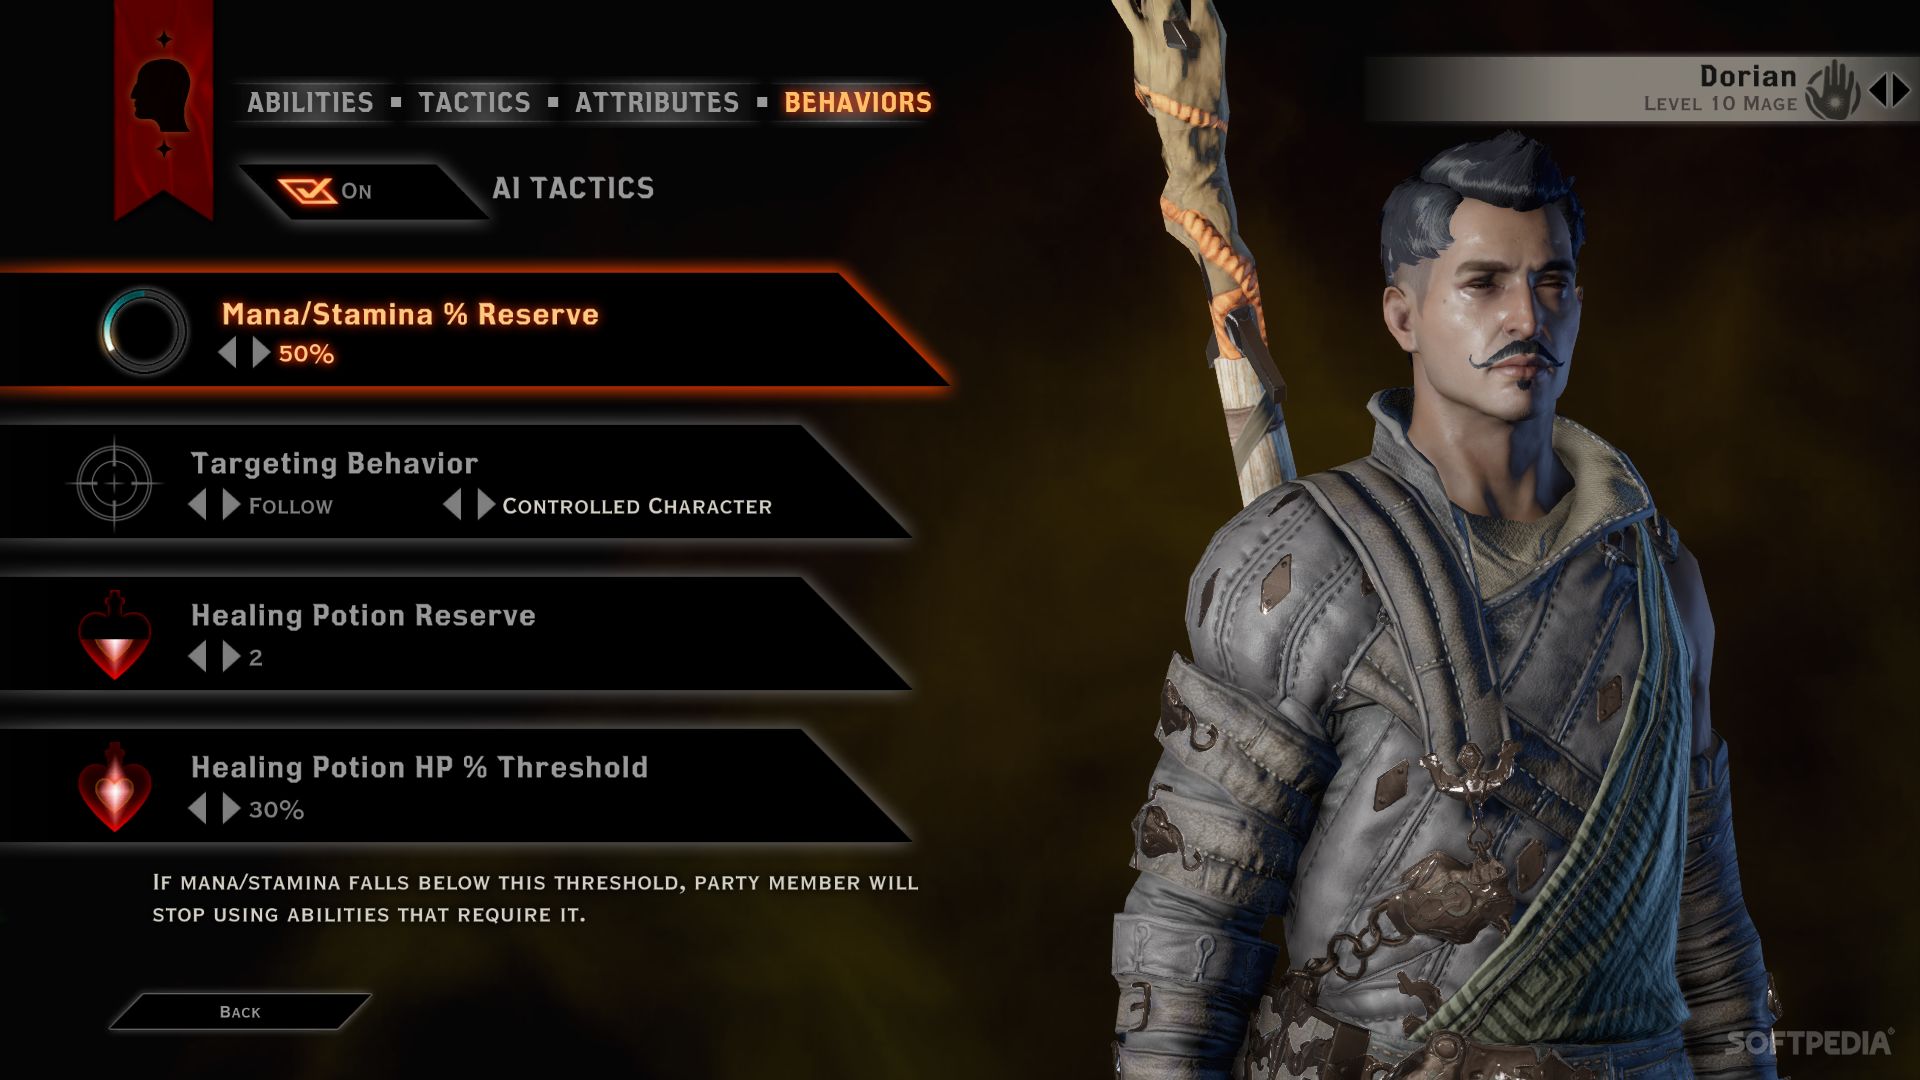 Dragon Age: Inquisition DLC Brings New Single-Player Adventures